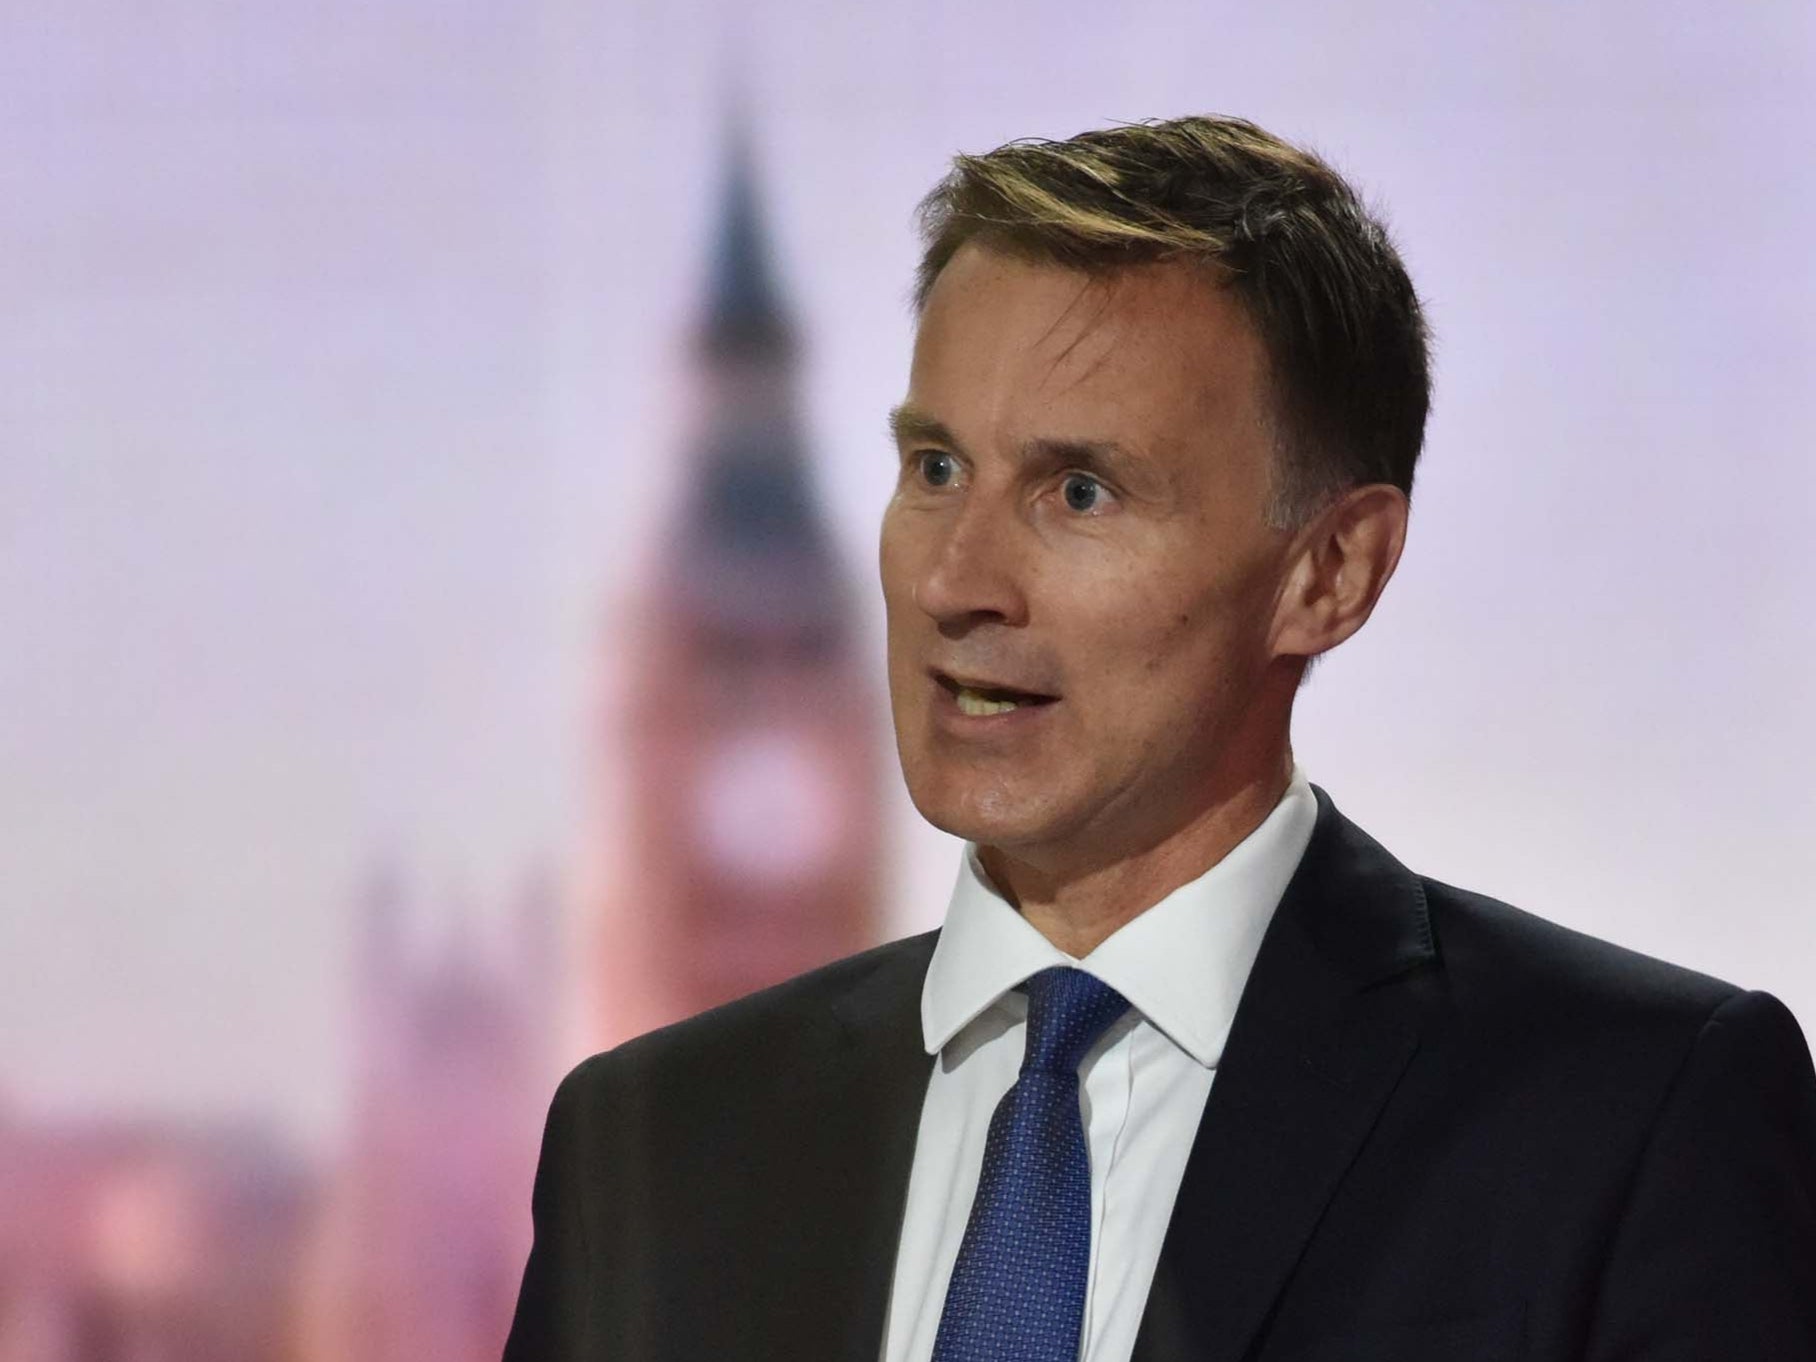 Former health secretary Jeremy Hunt is lobbying for a workforce plan for the NHS